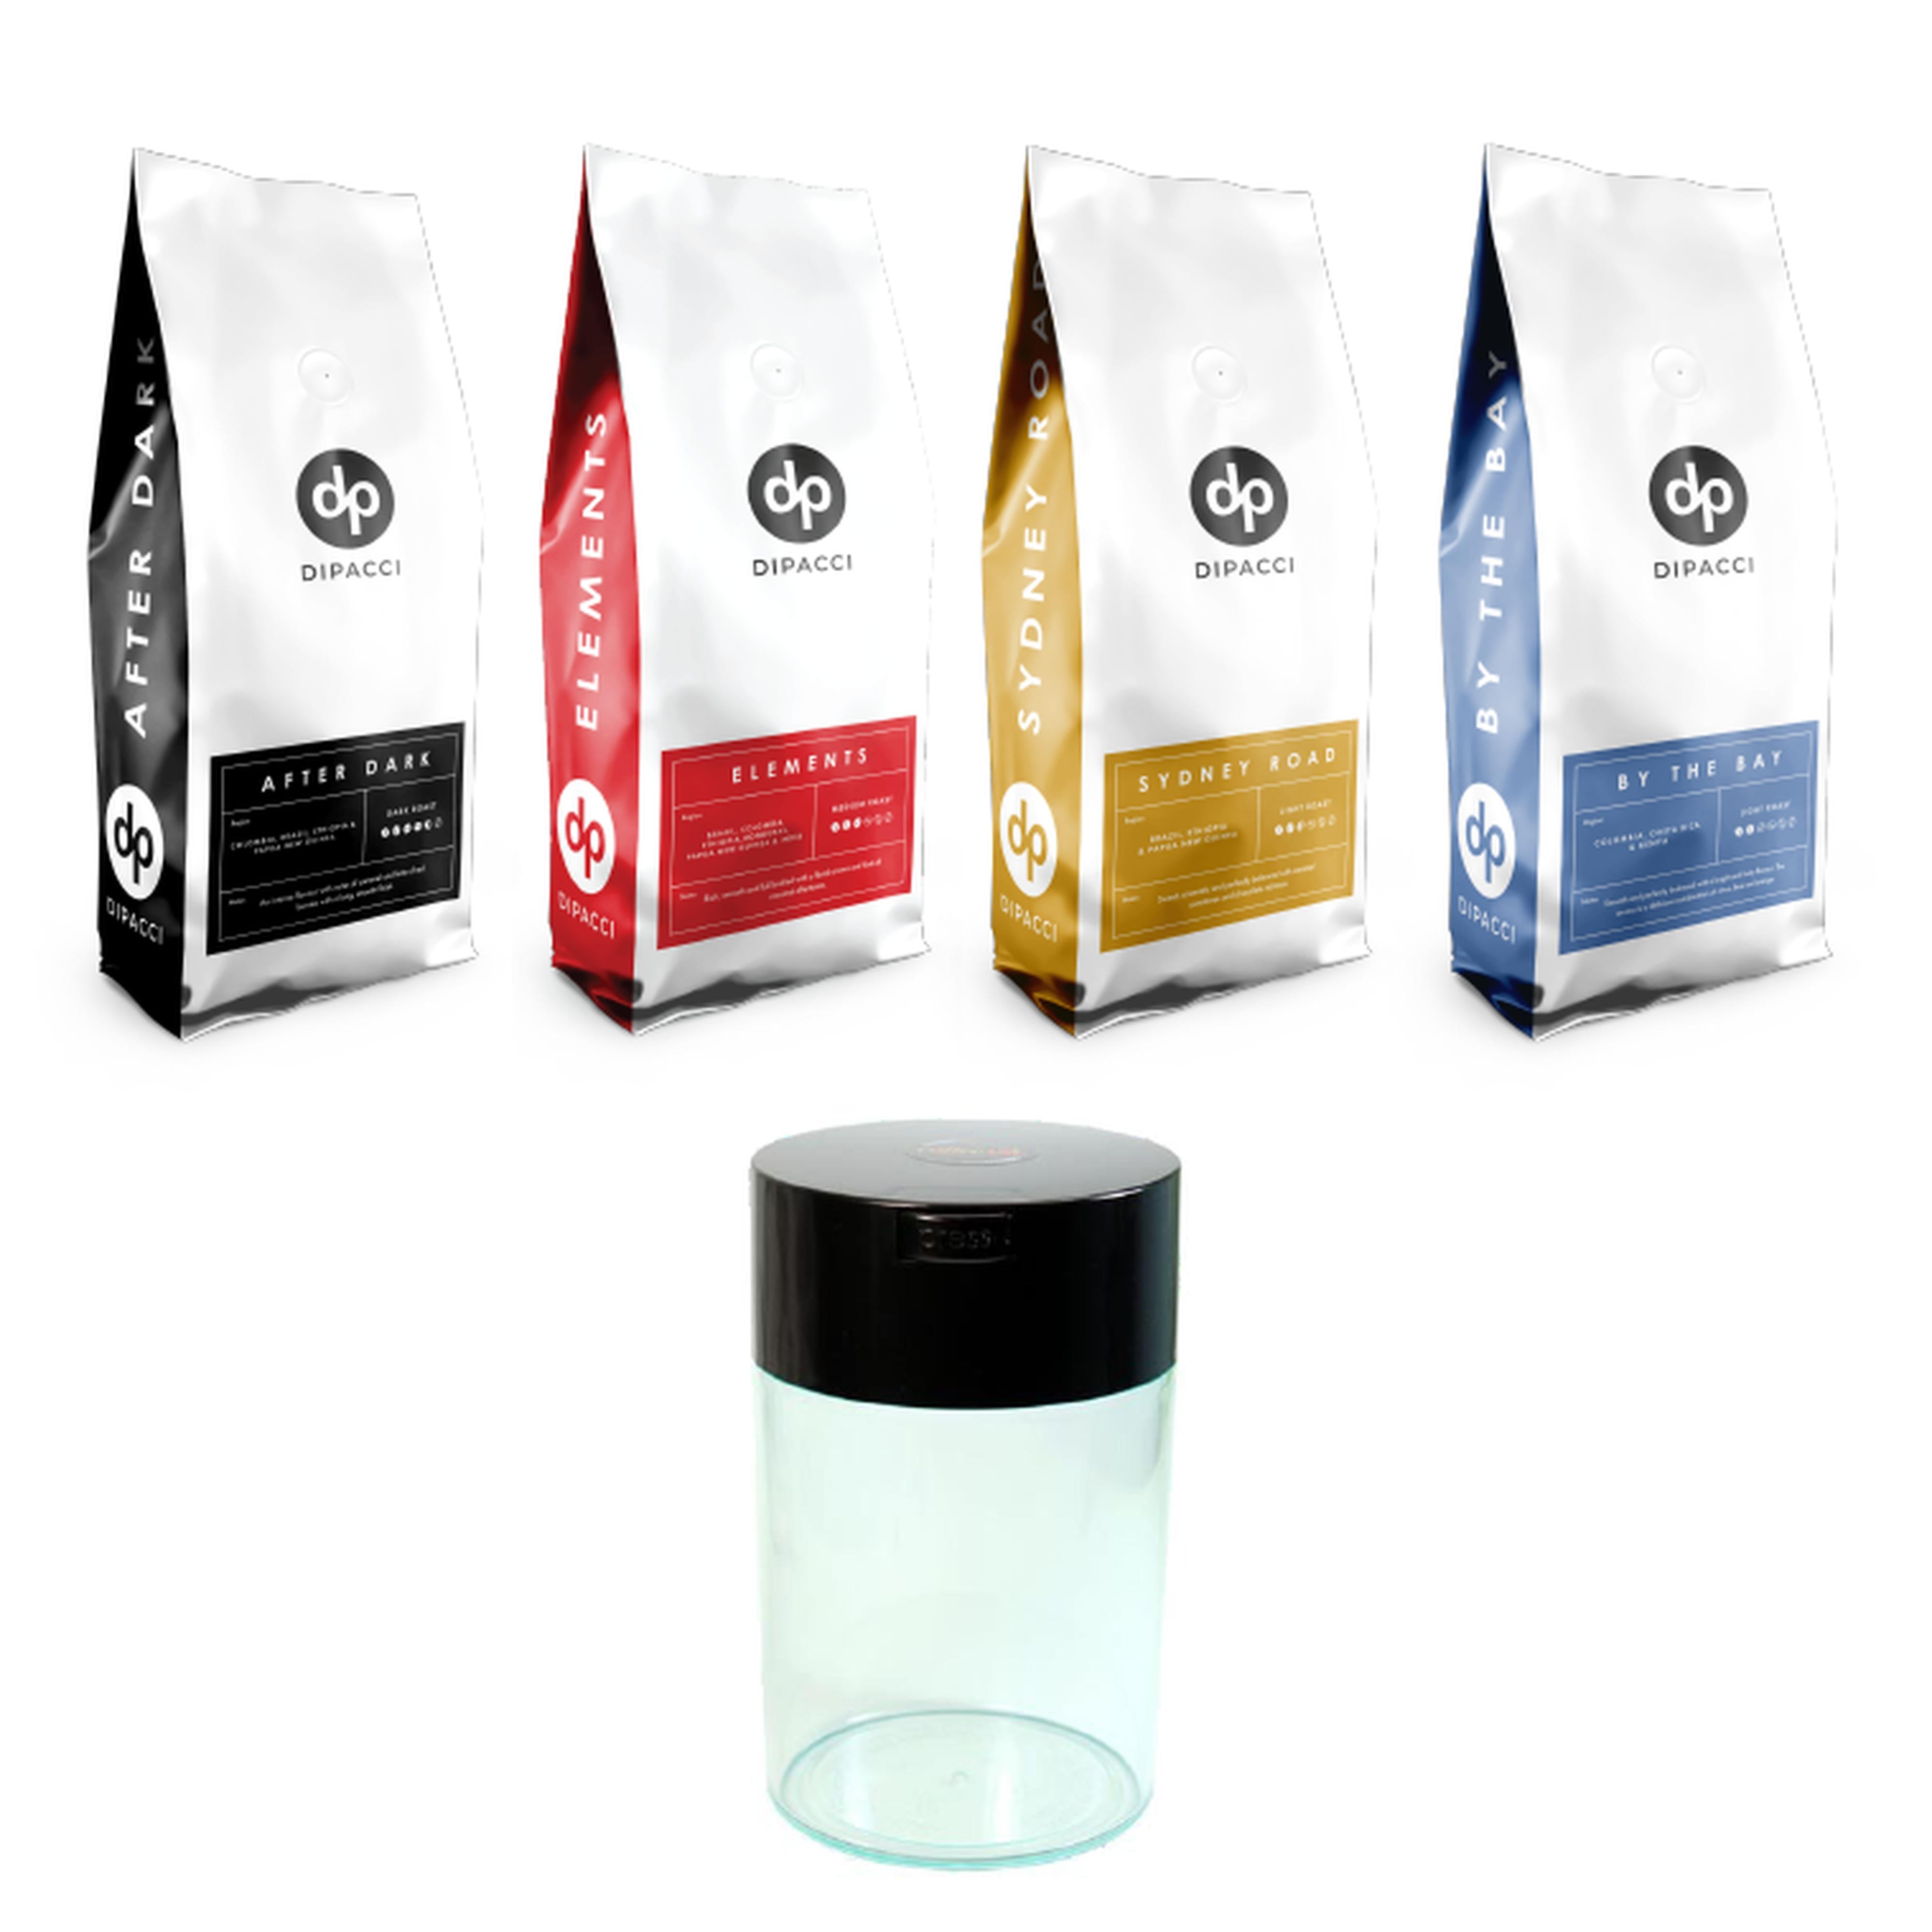 Dipacci Coffee Beans - 4kg with Free Precision Glass Coffee Bean Container